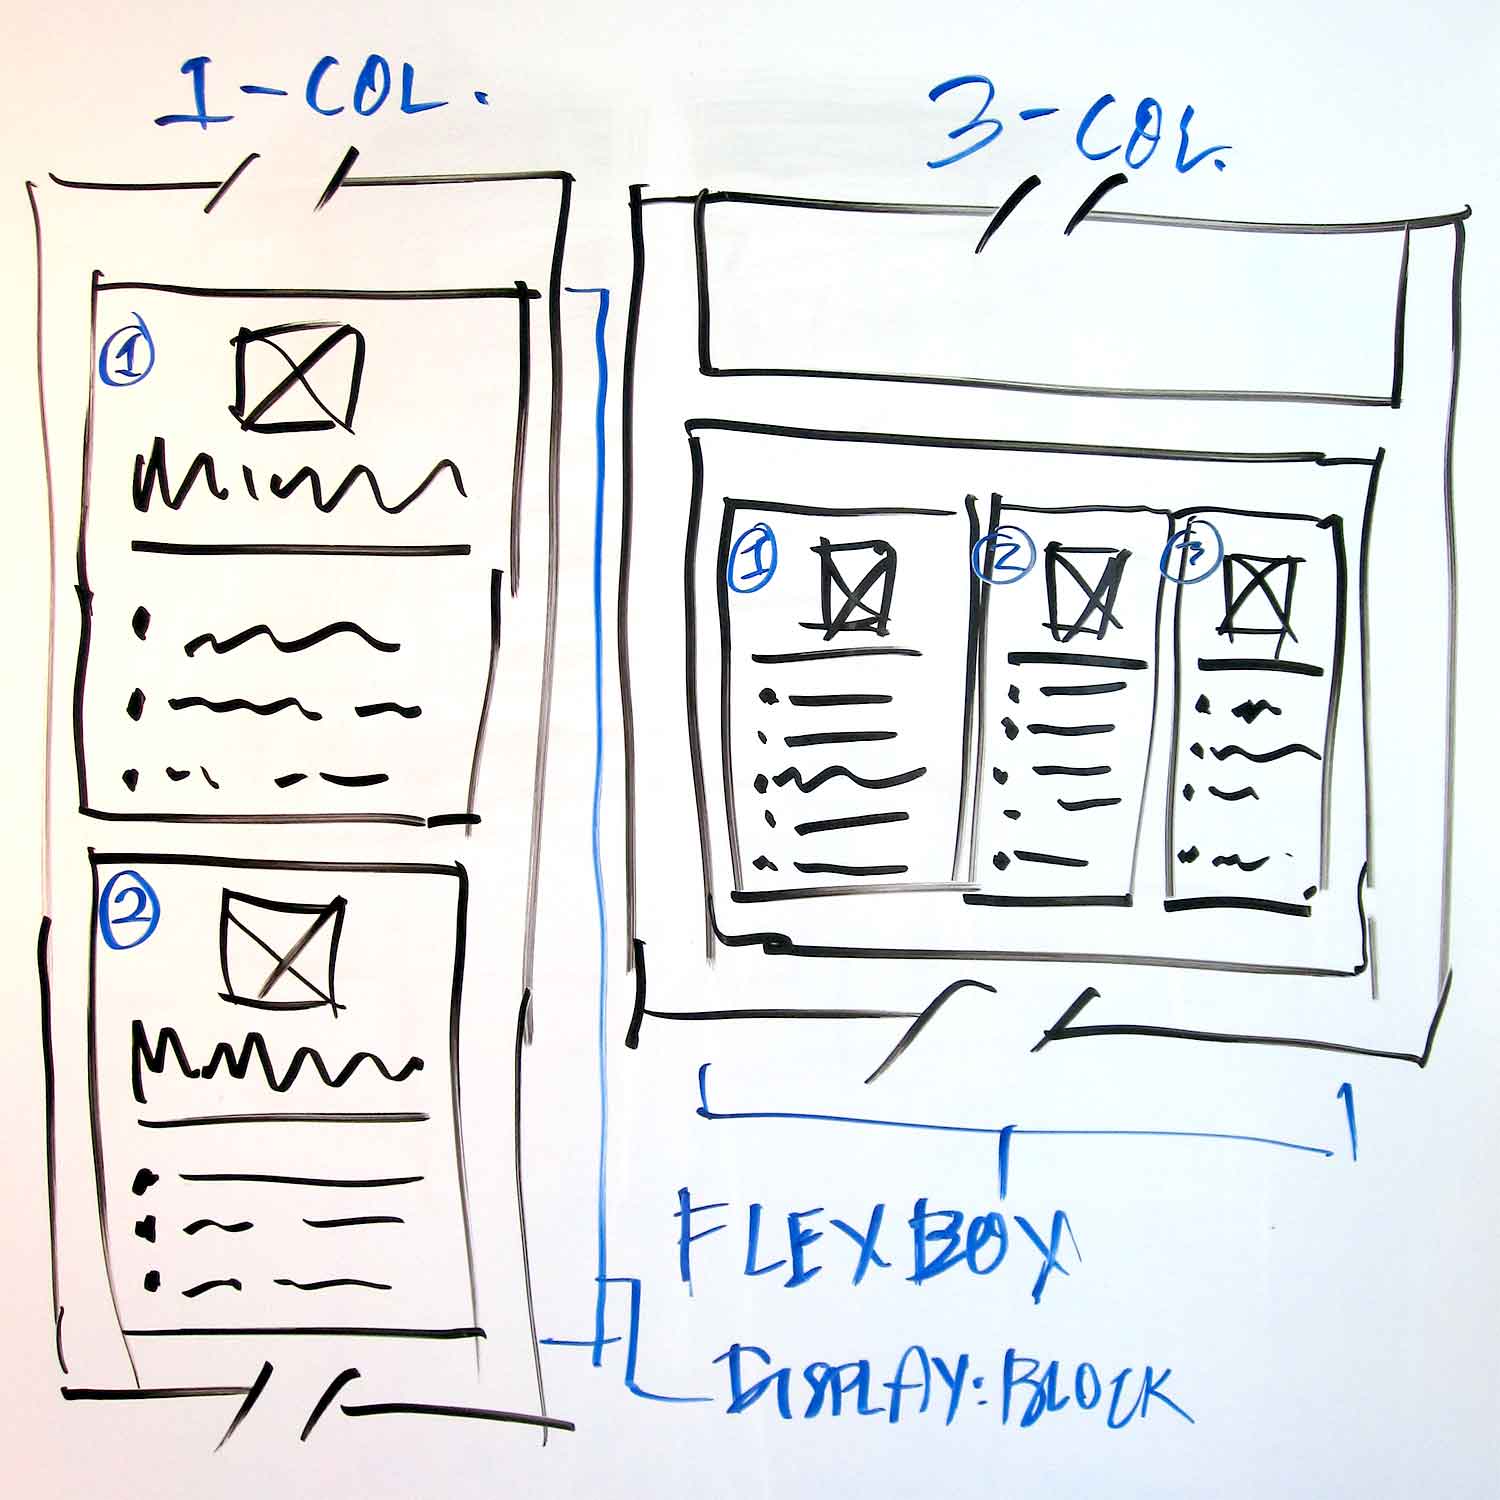 a photograph of a whiteboard sketch of part of the MyPsychTrack marketing website